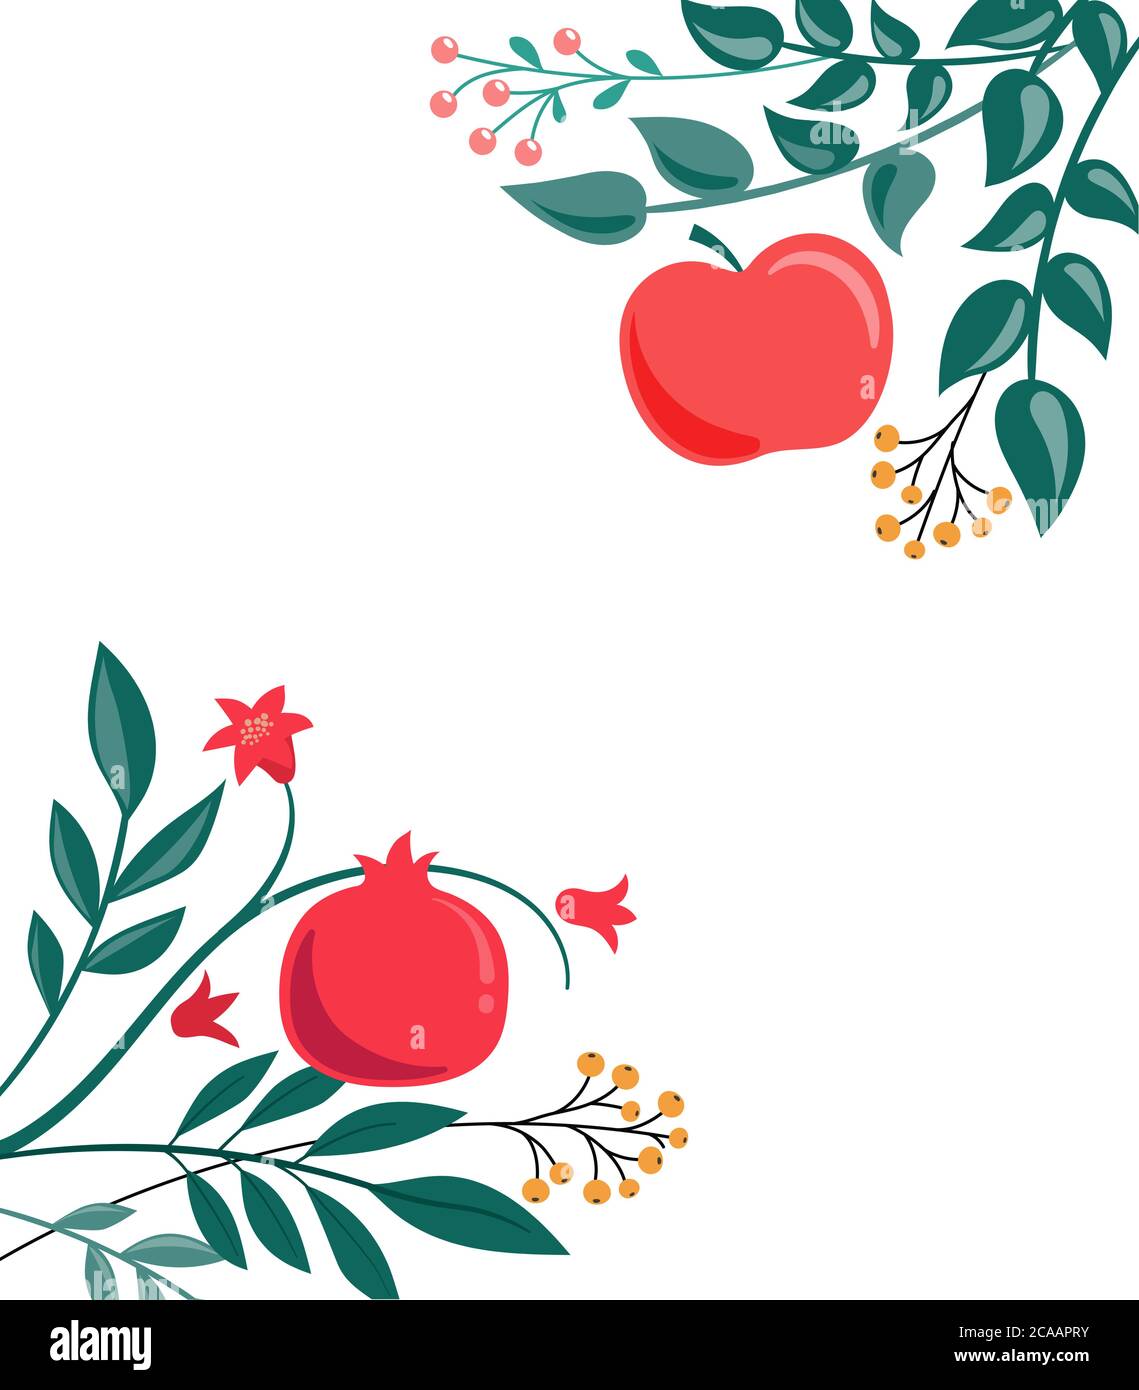 Rosh Hashana, Jewish New Year greeting card with pomegranate, apple and flowers. Vector illustration Stock Vector